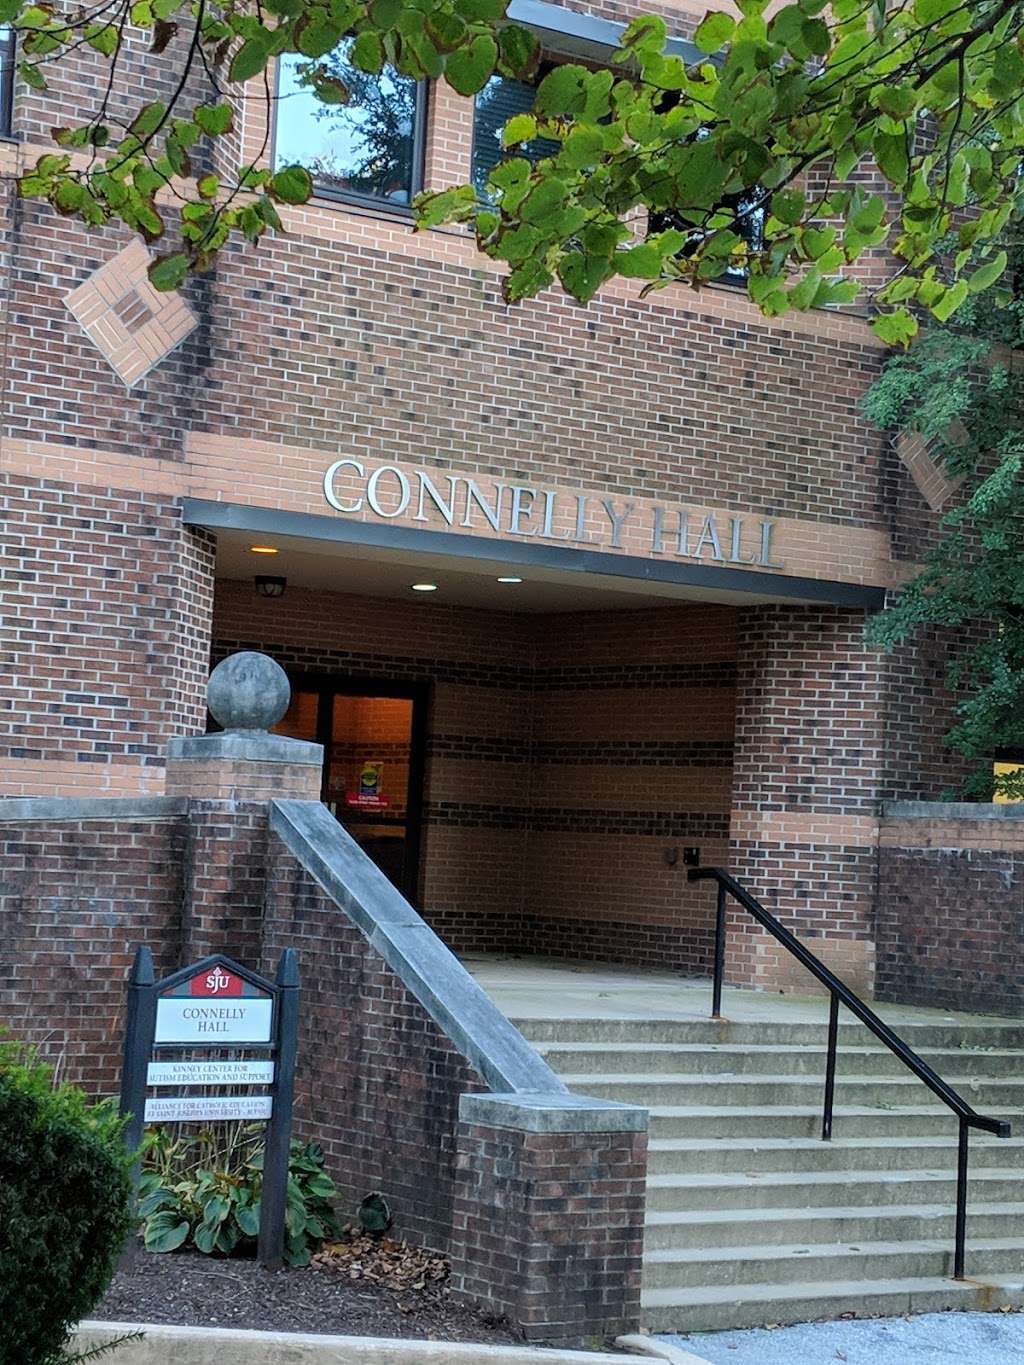 Connelly Hall | Merion Station, PA 19066, USA